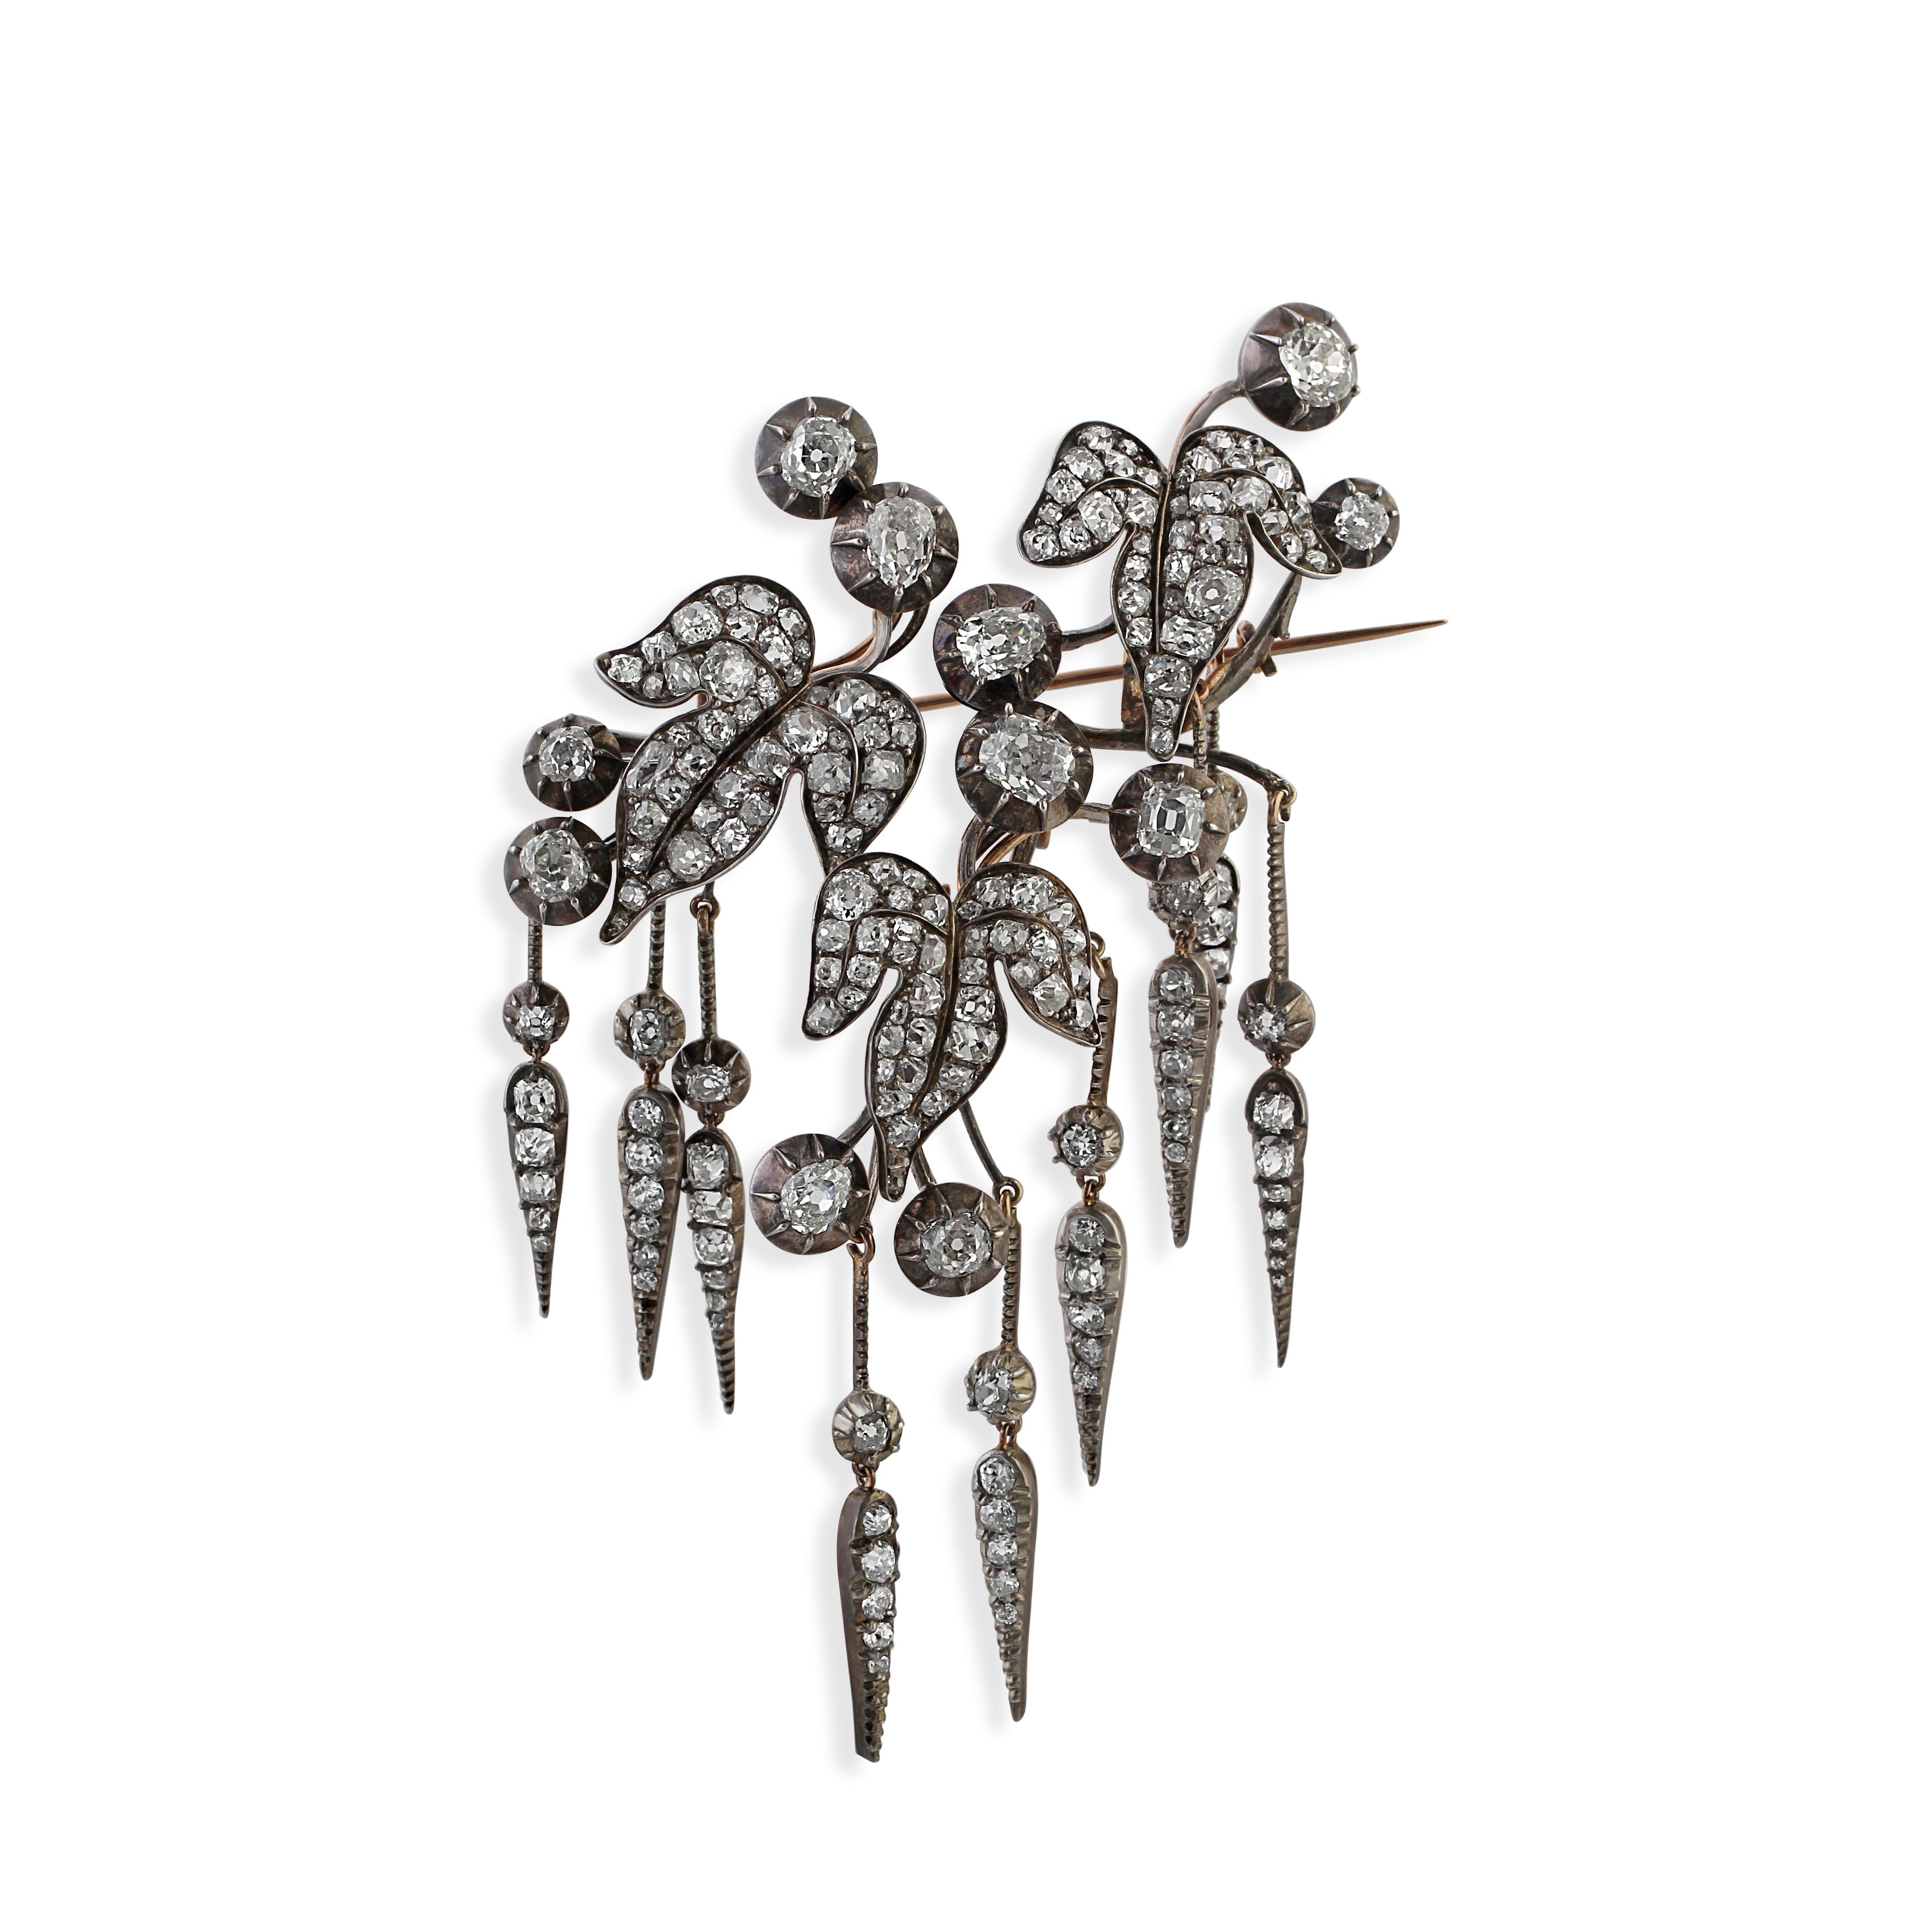 An exceptional antique diamond brooch, stylised as ivy leaves with delicate drops. The piece is set throughout with old and rose cut diamonds. Total diamonds weight = approximately 14-14.50 carats.
